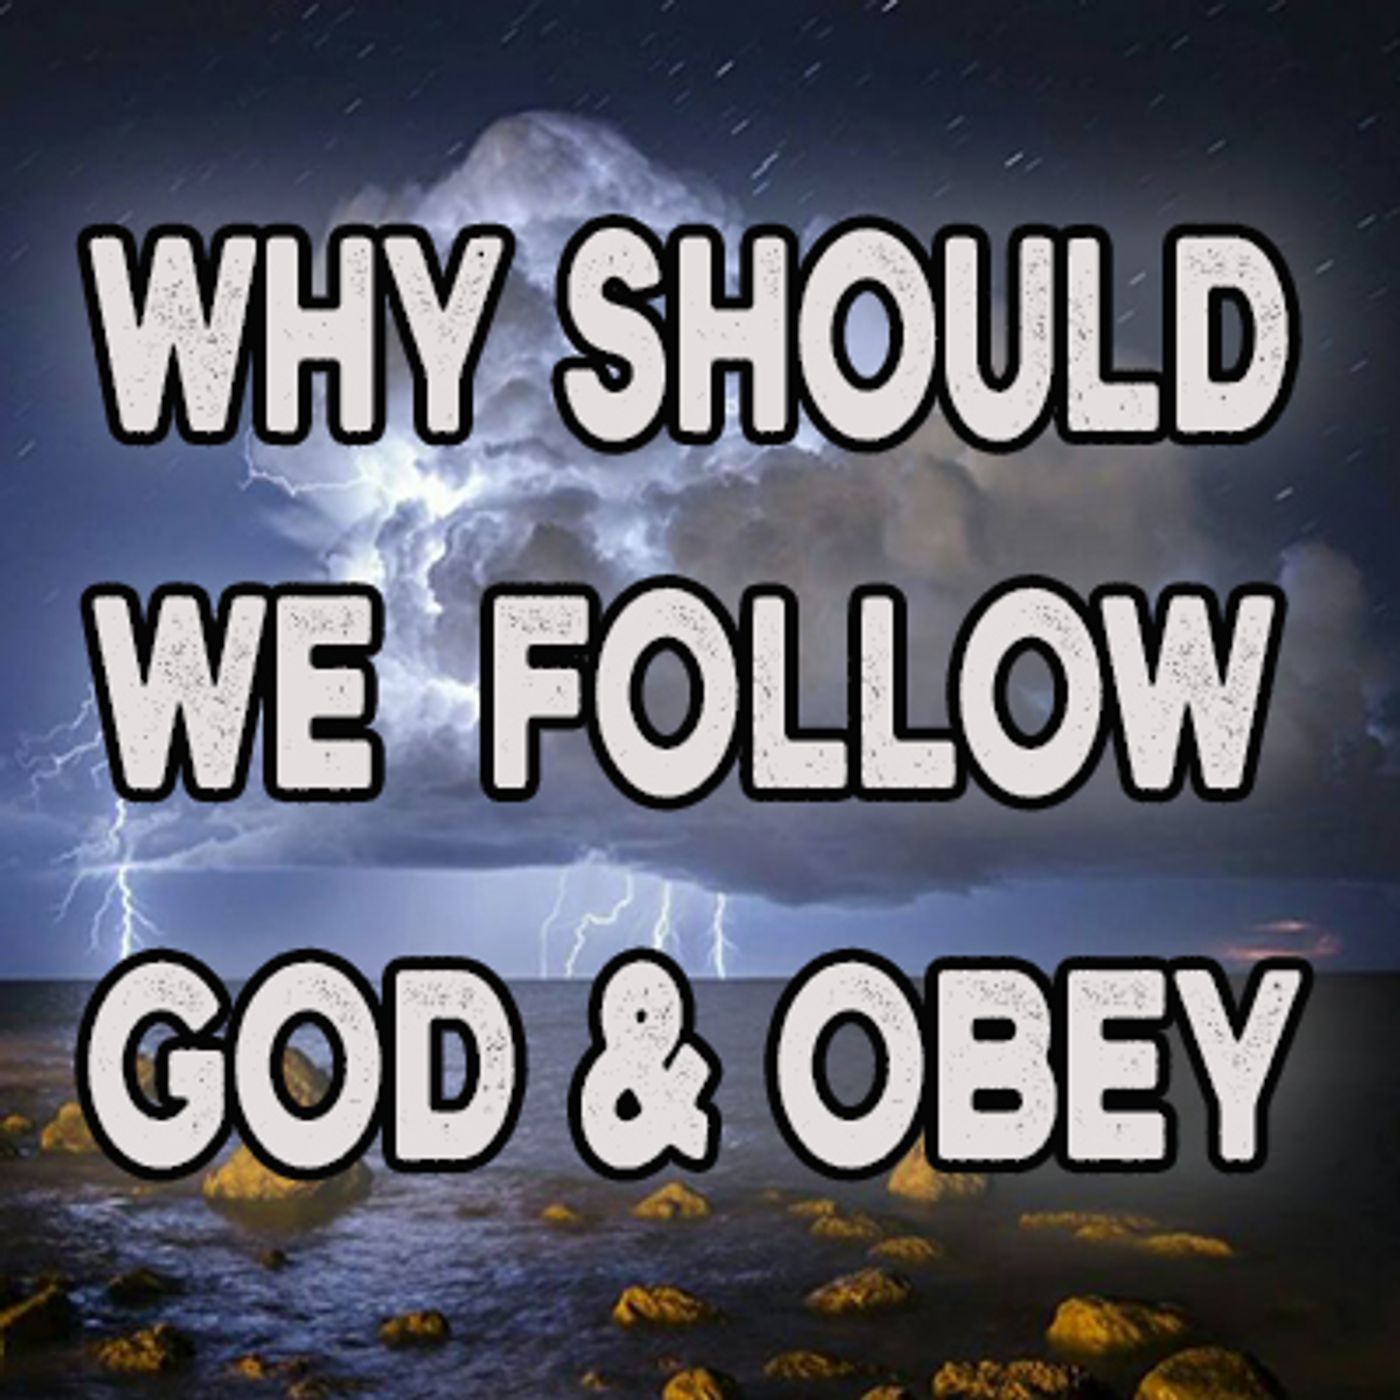 Why Should We Follow God & Obey (Part 1)